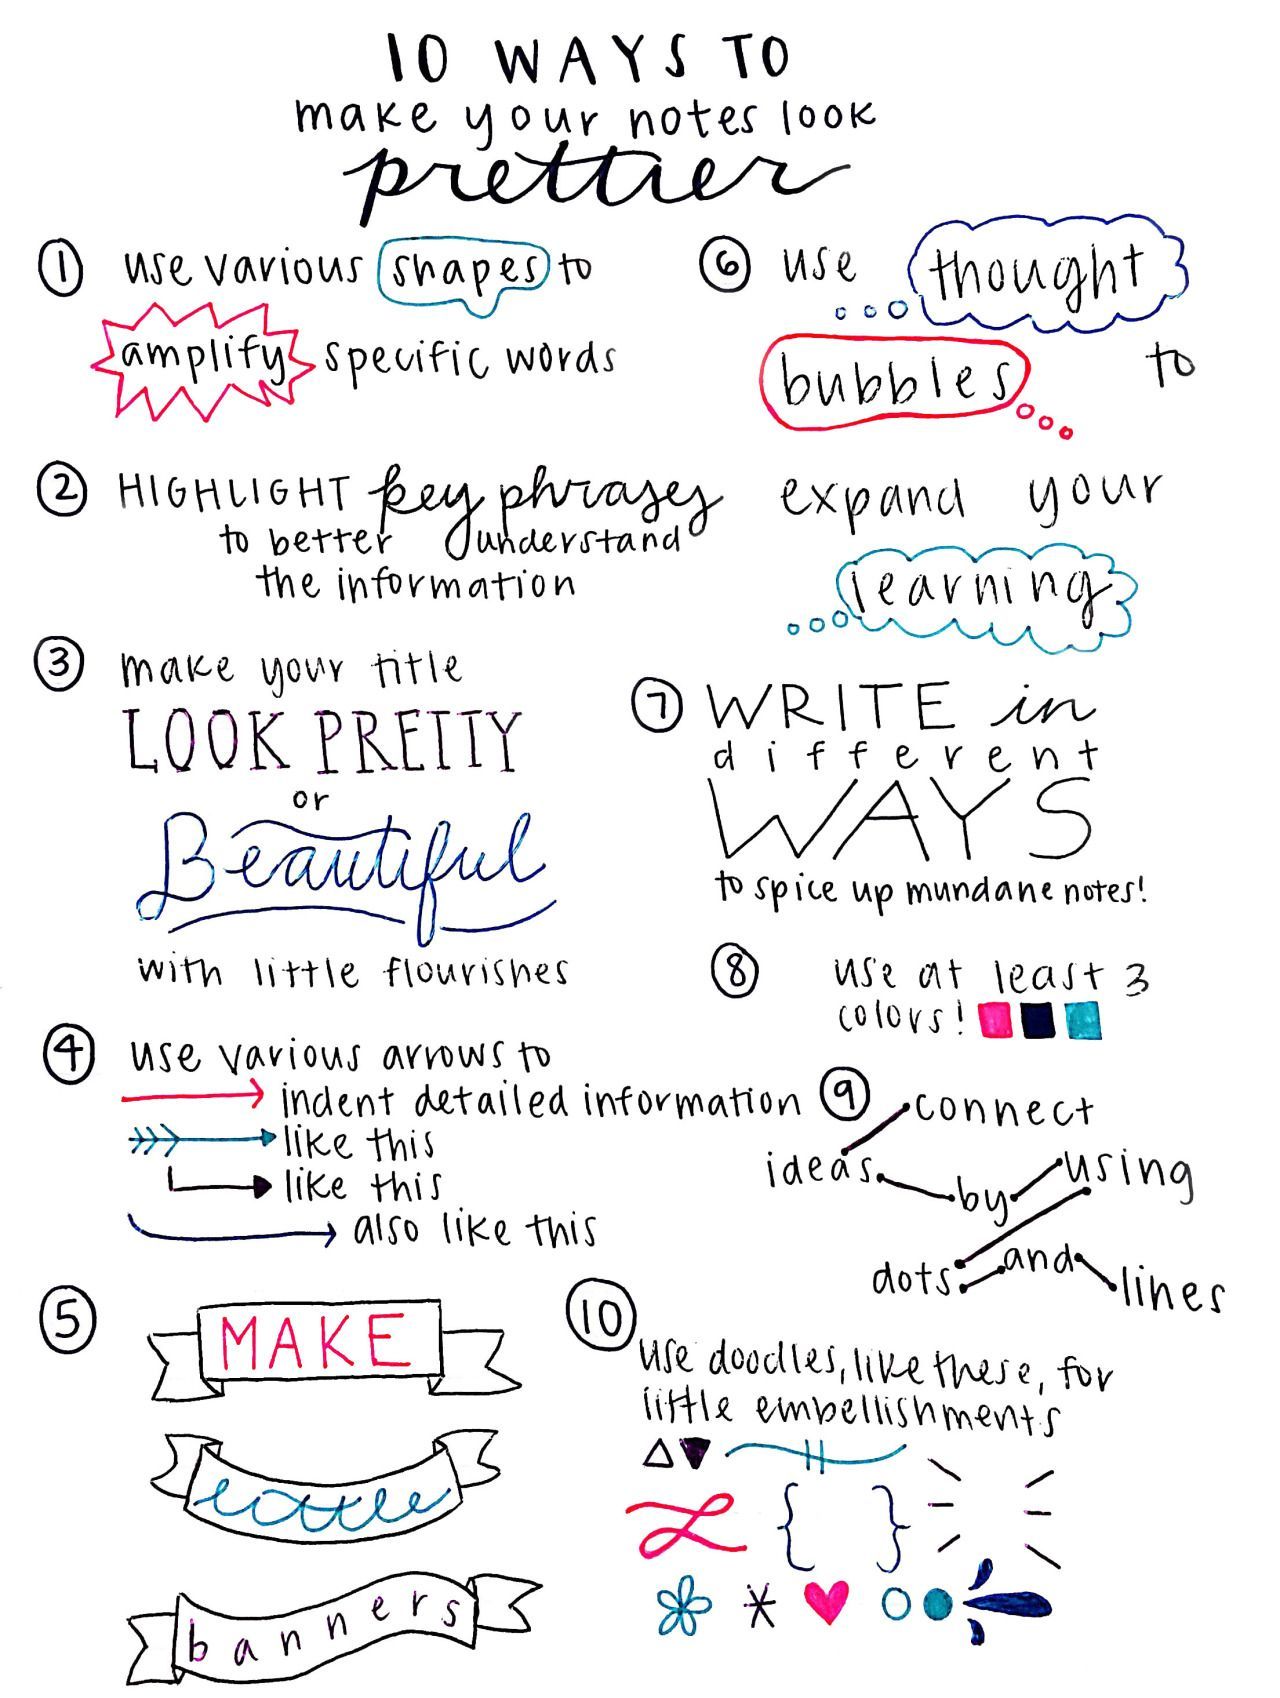 colourfulstudy: studywithpaigey: 10 Ways to Make Your Notes Look Prettier, a helpful list made by me, Paige Hahs :) So cute!!